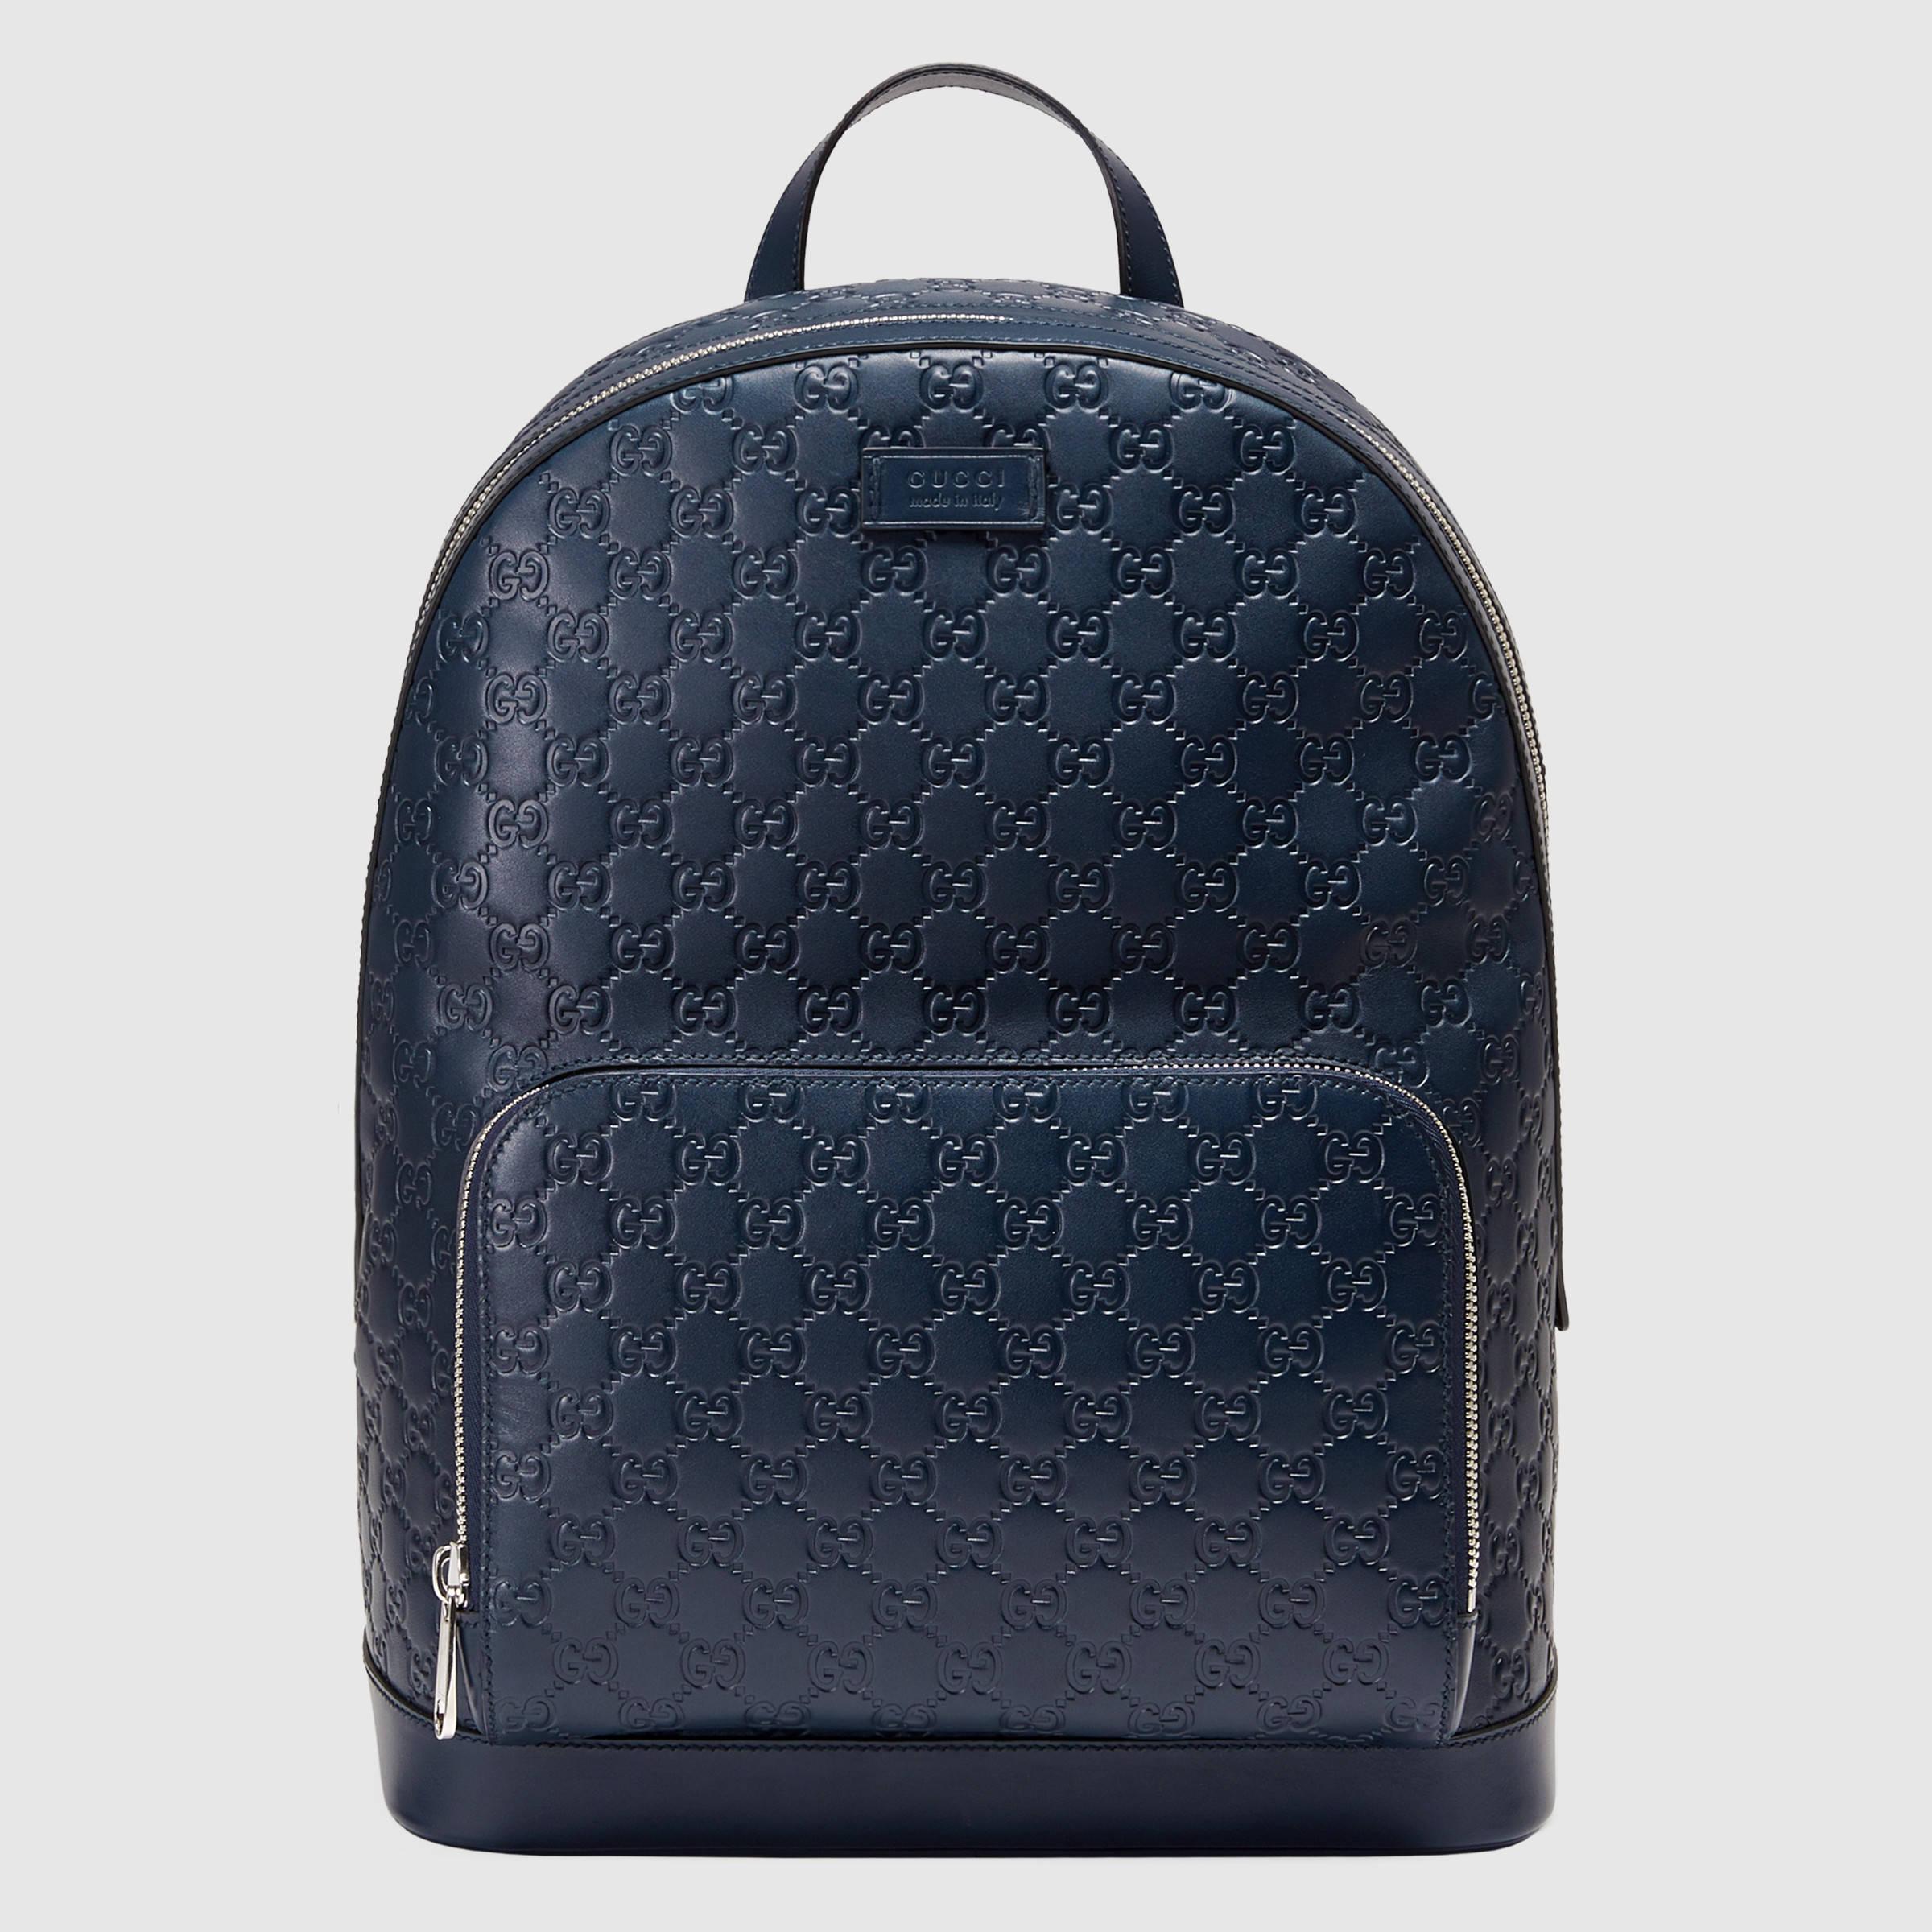 Lyst - Gucci Signature Leather Backpack for Men